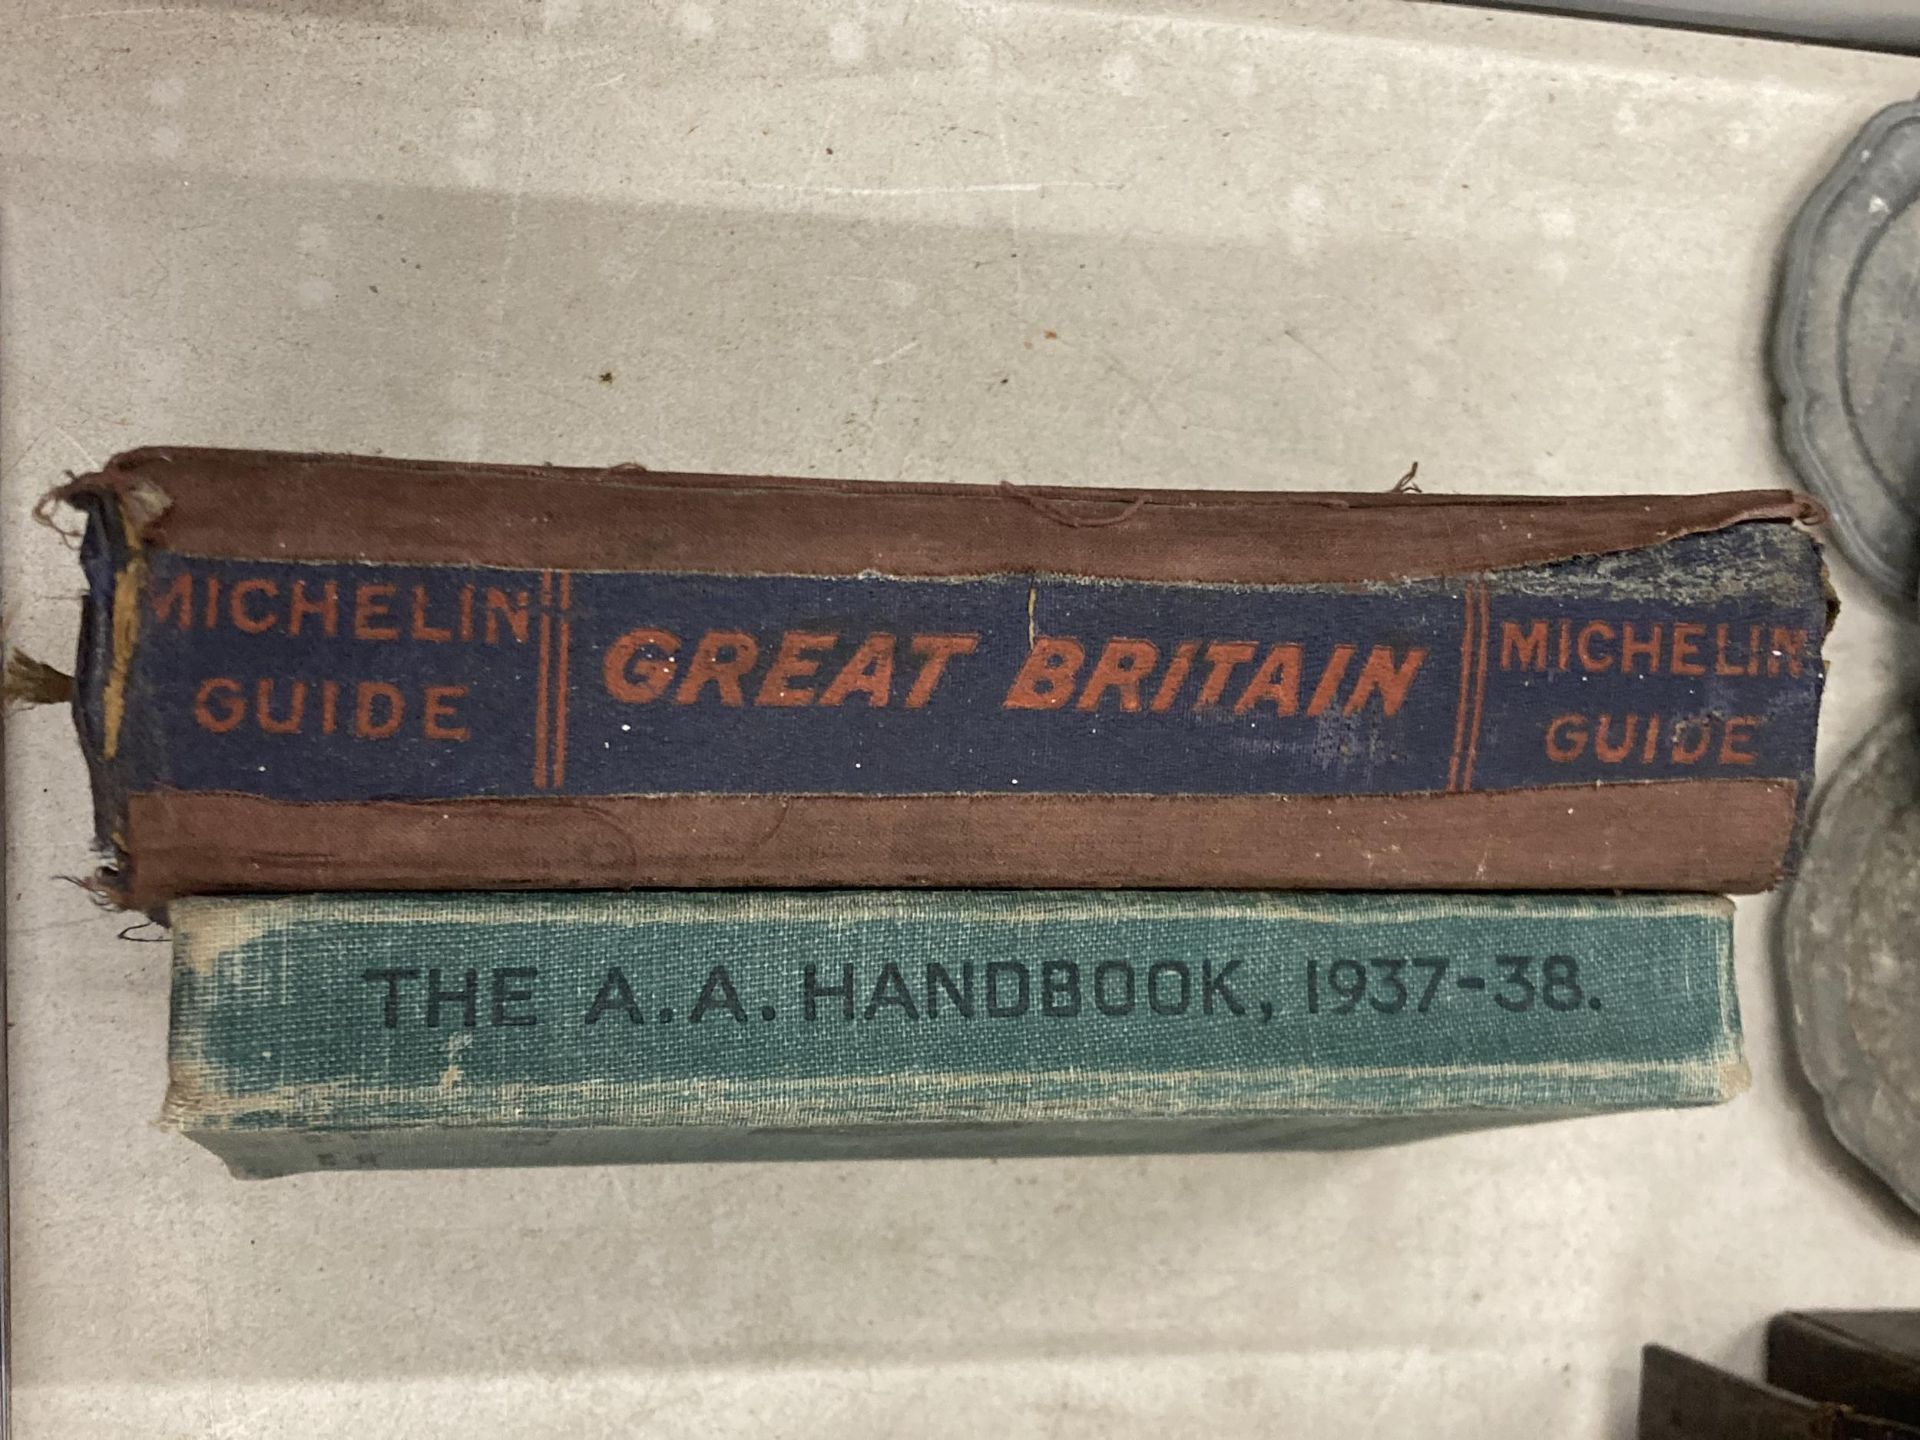 THE AA HANDBOOK 1937-38 AND A MICHELIN GUIDE 10TH EDITION 1925 - Image 2 of 6